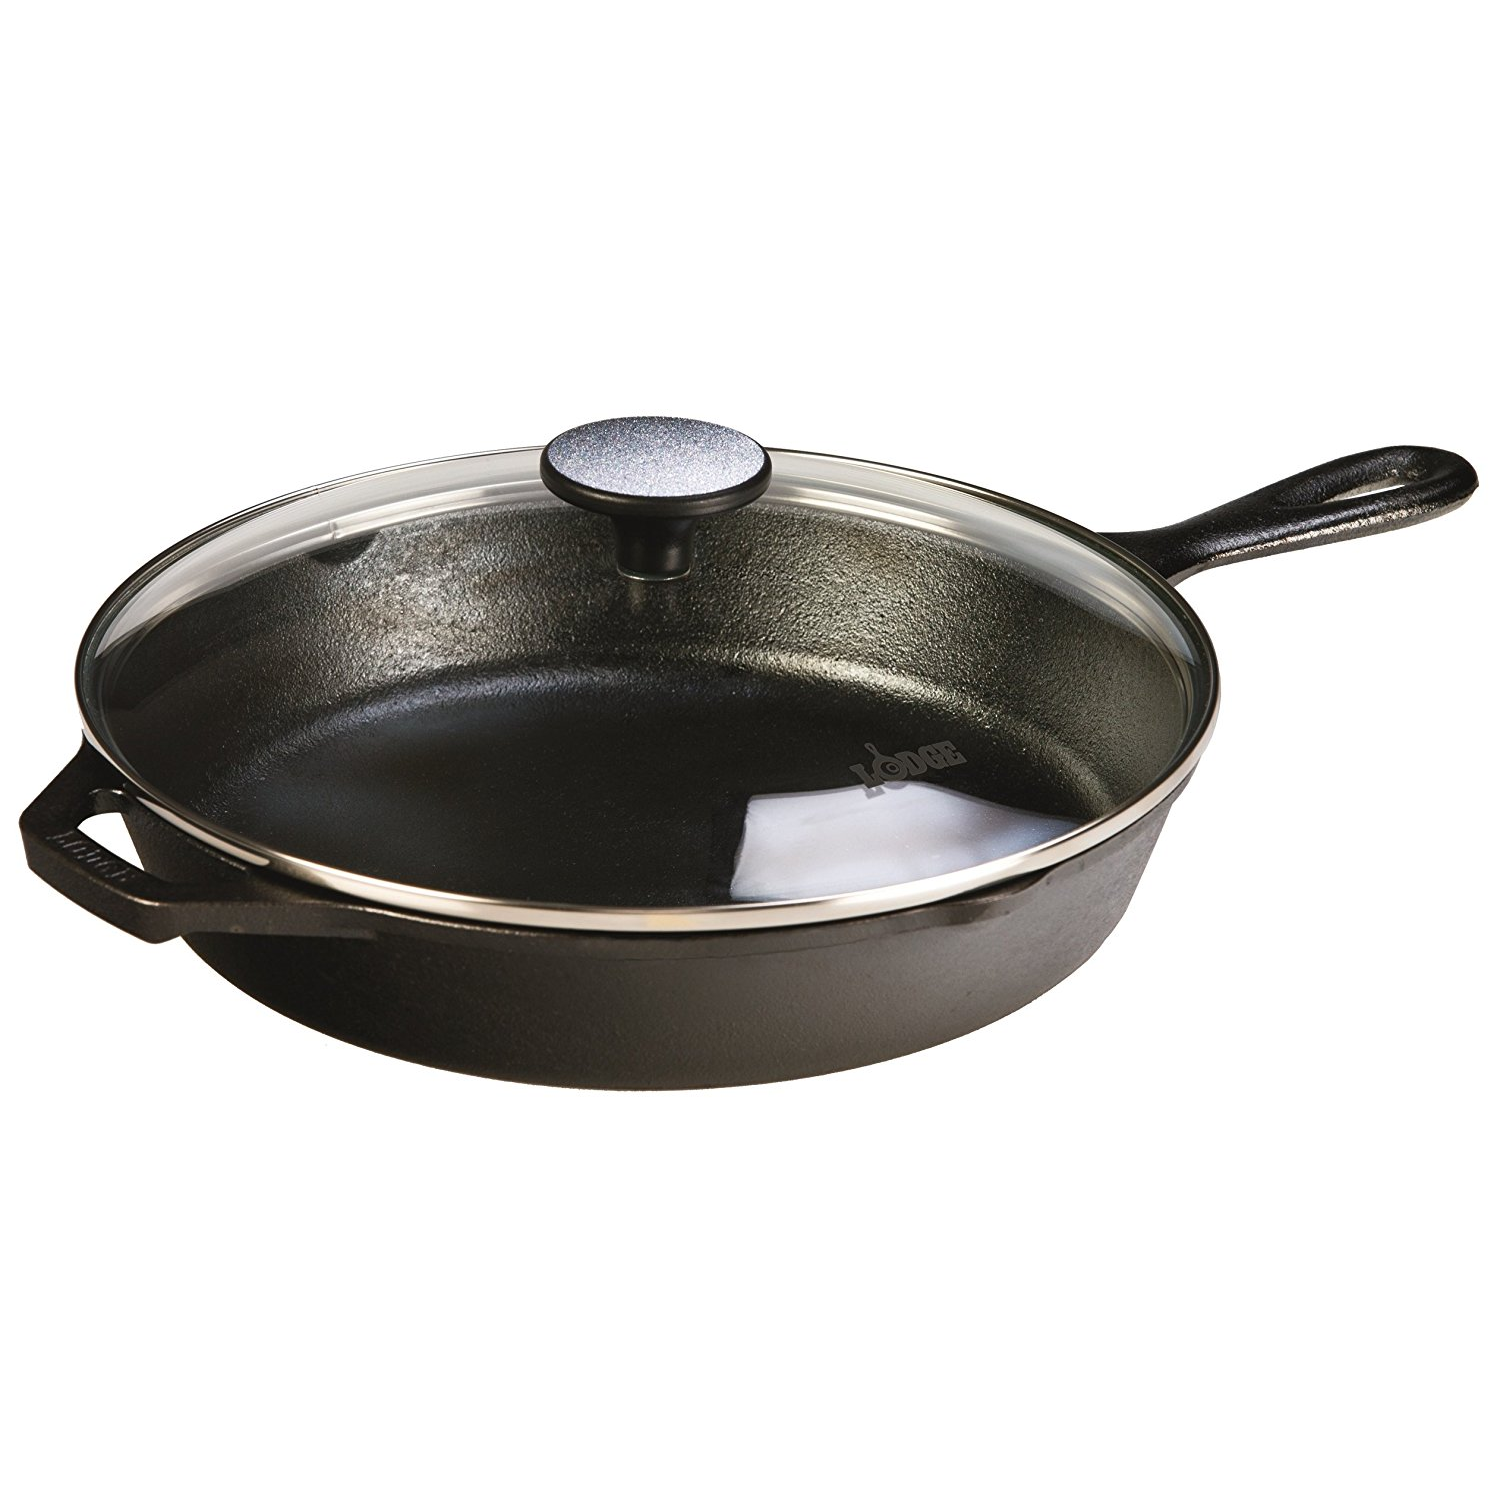 Lodge Skillet with Glass Lid, 10.25-inch